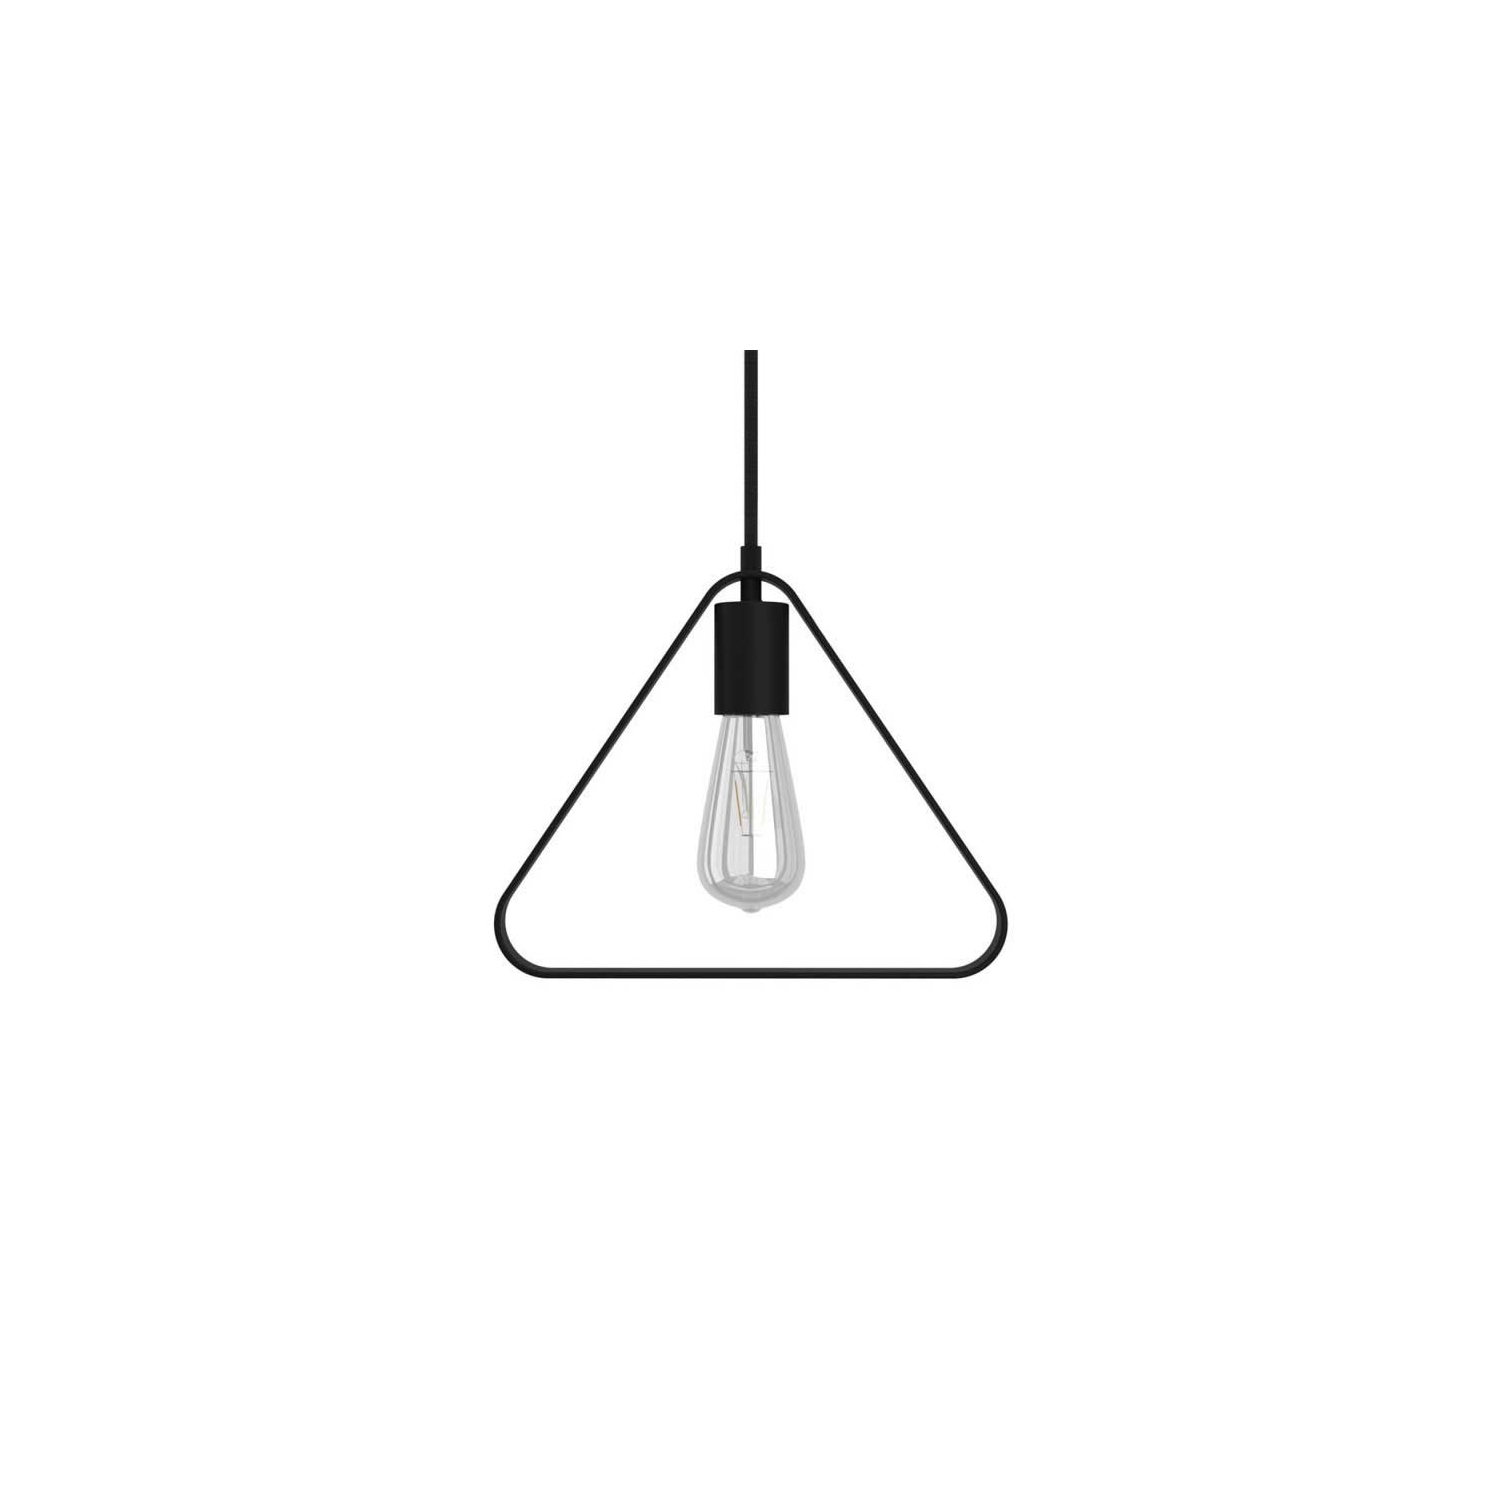 Pendant lamp with textile cable, Duedì Apex lampshade and metal details